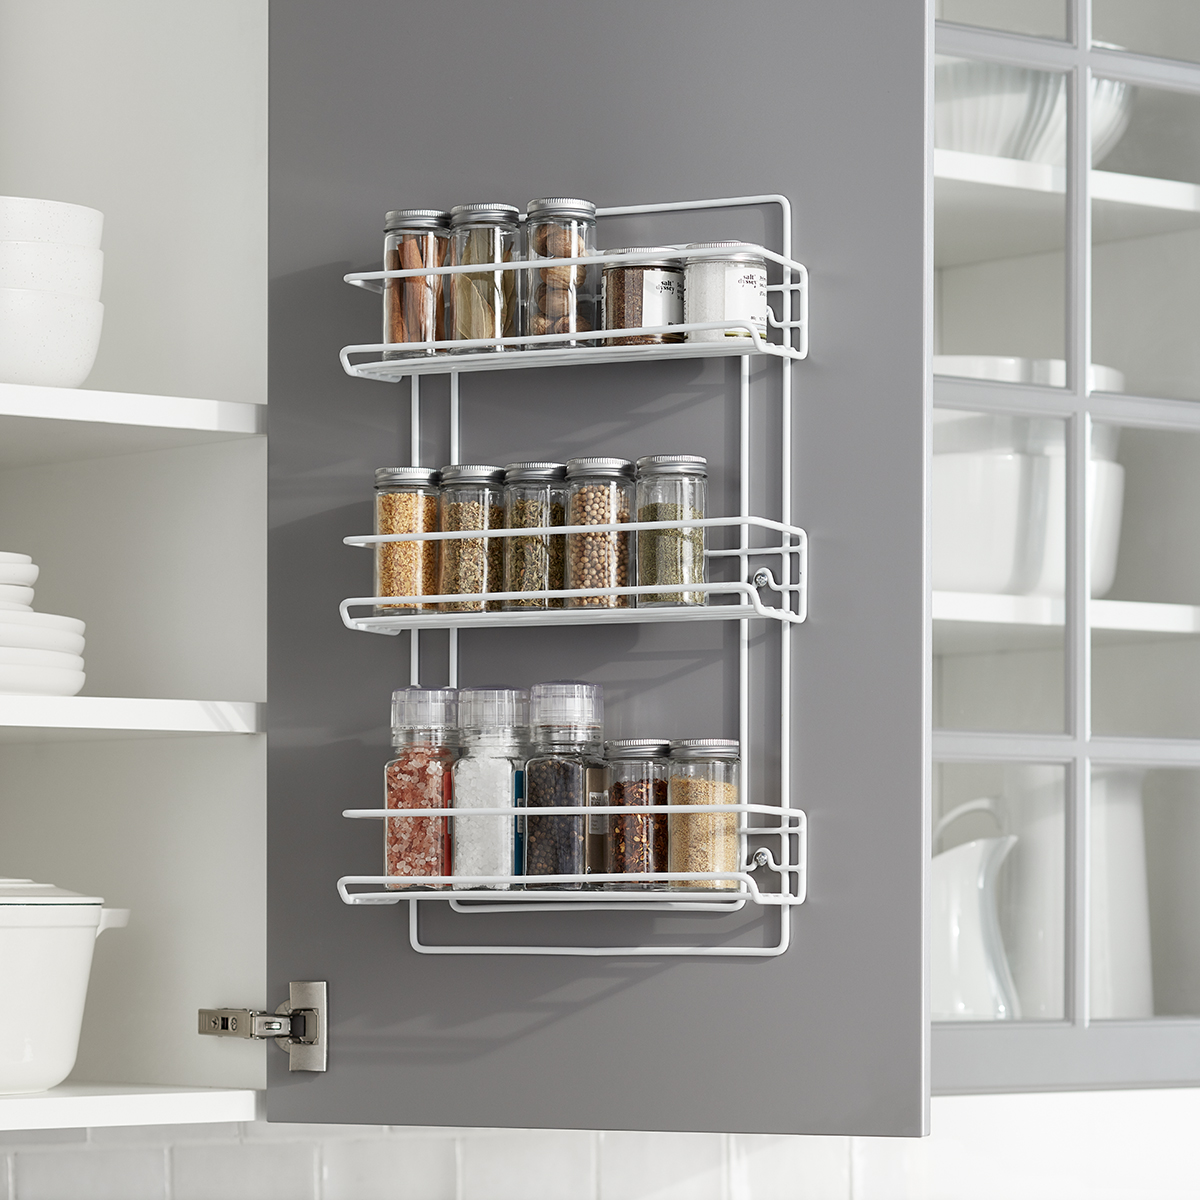 https://www.containerstore.com/catalogimages/420353/10077519_3-Shelf_SpiceRack-White_PVL.jpg